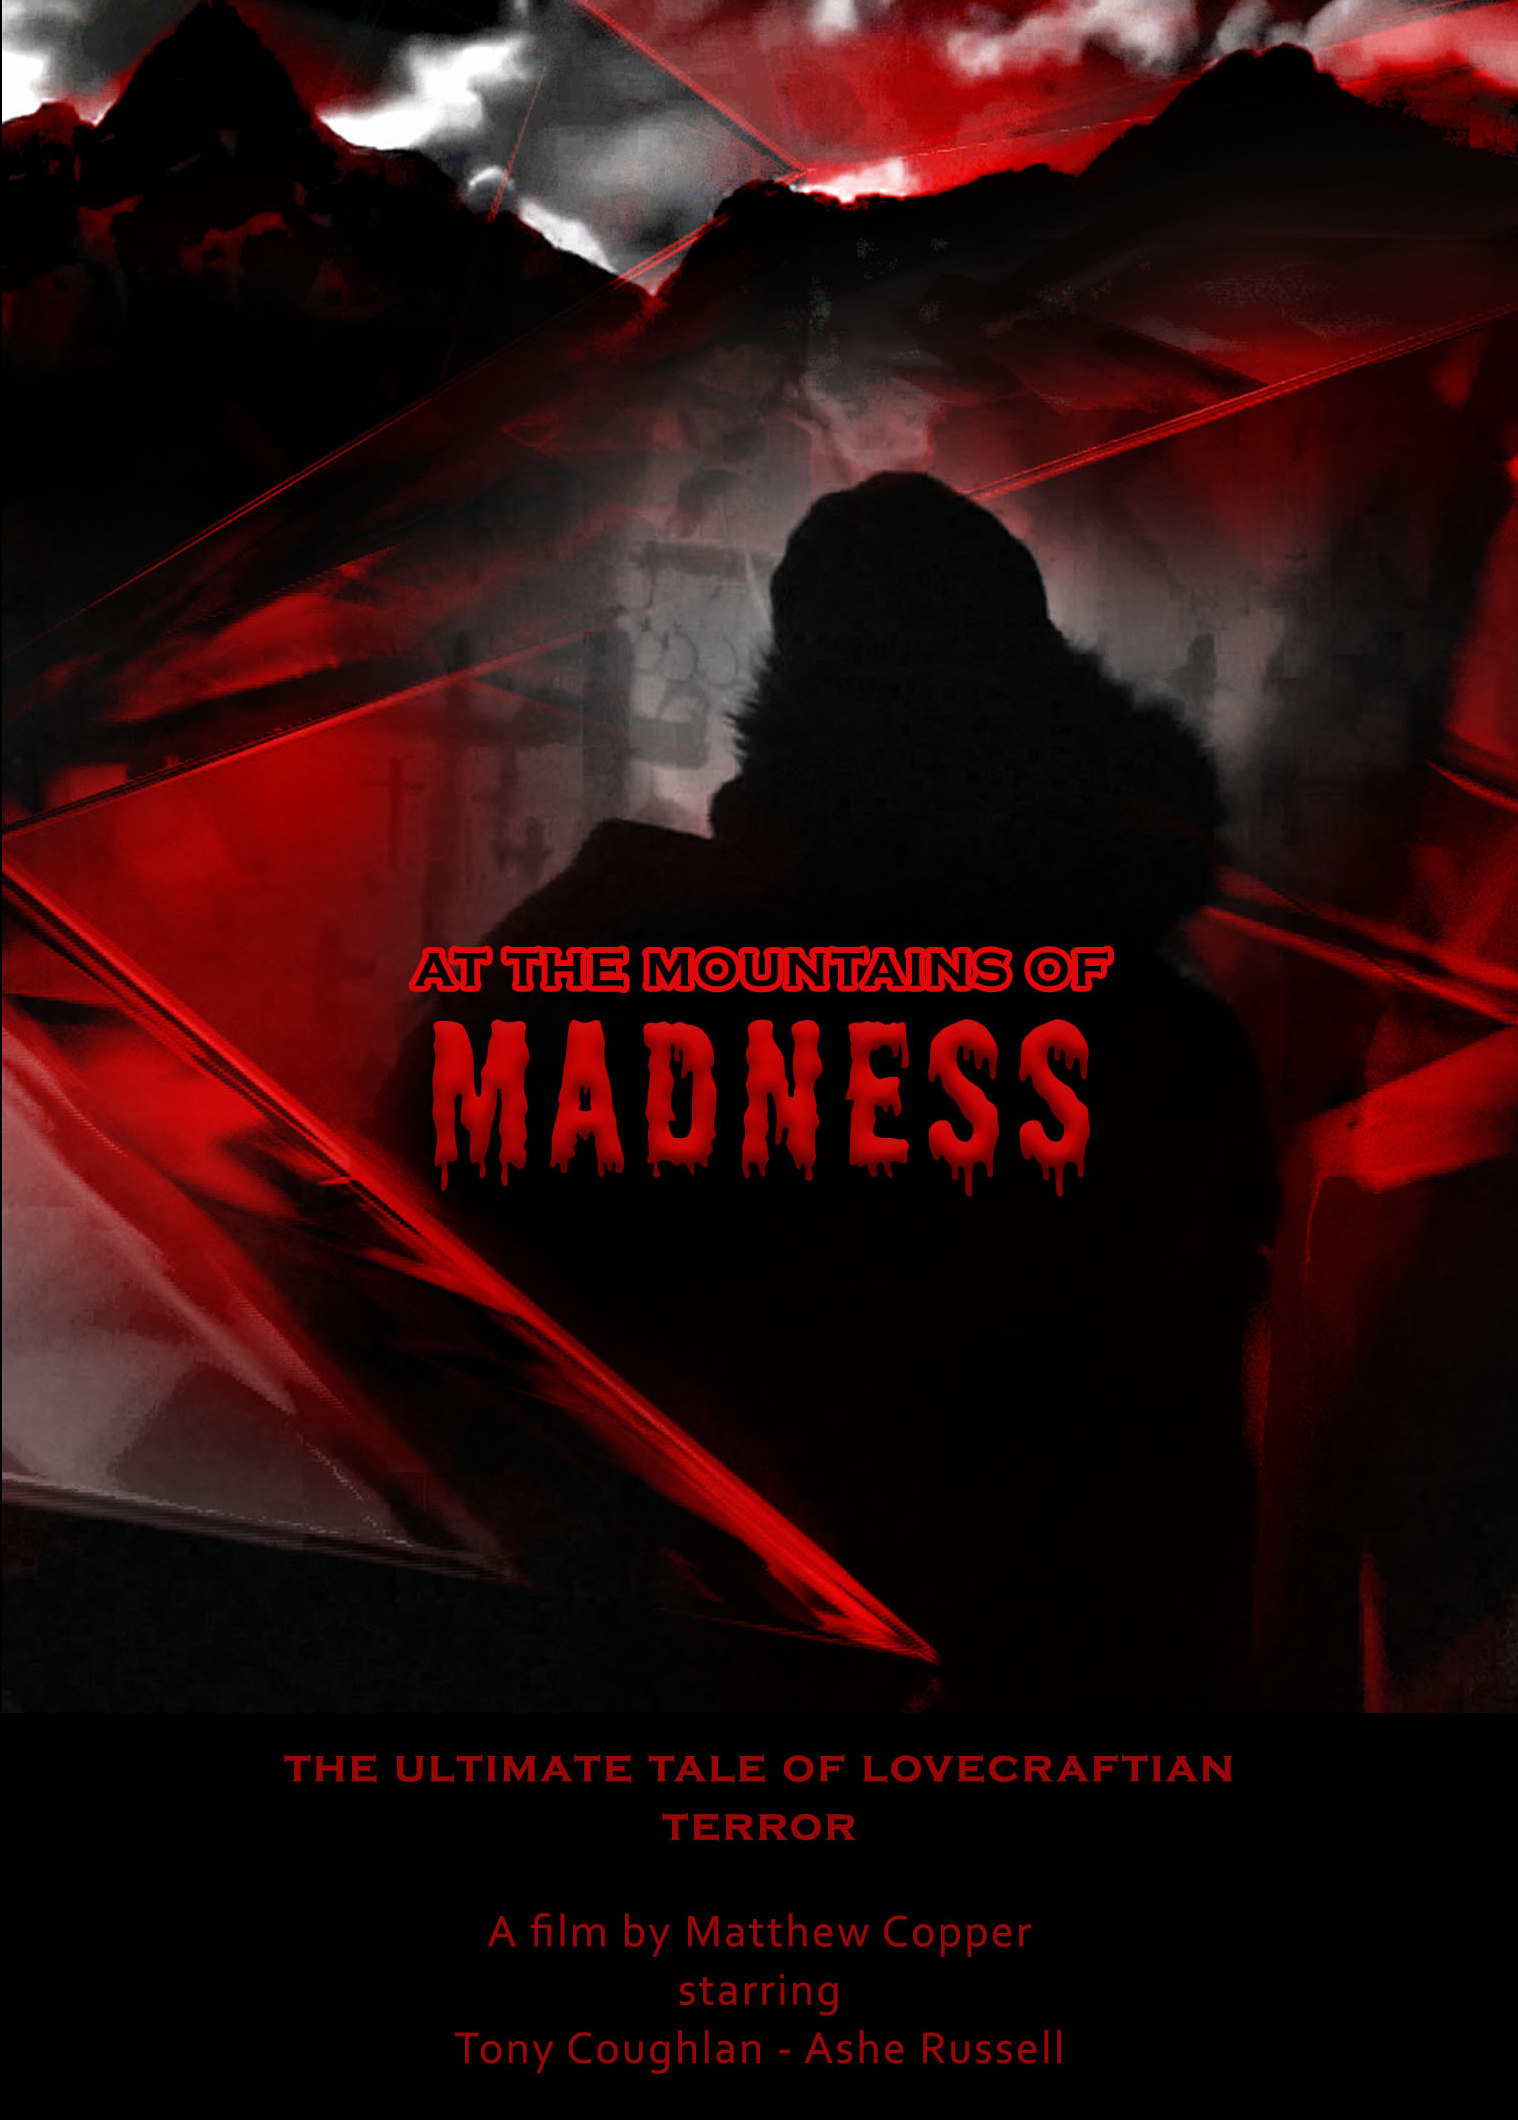 At The Mountains of Madness Film